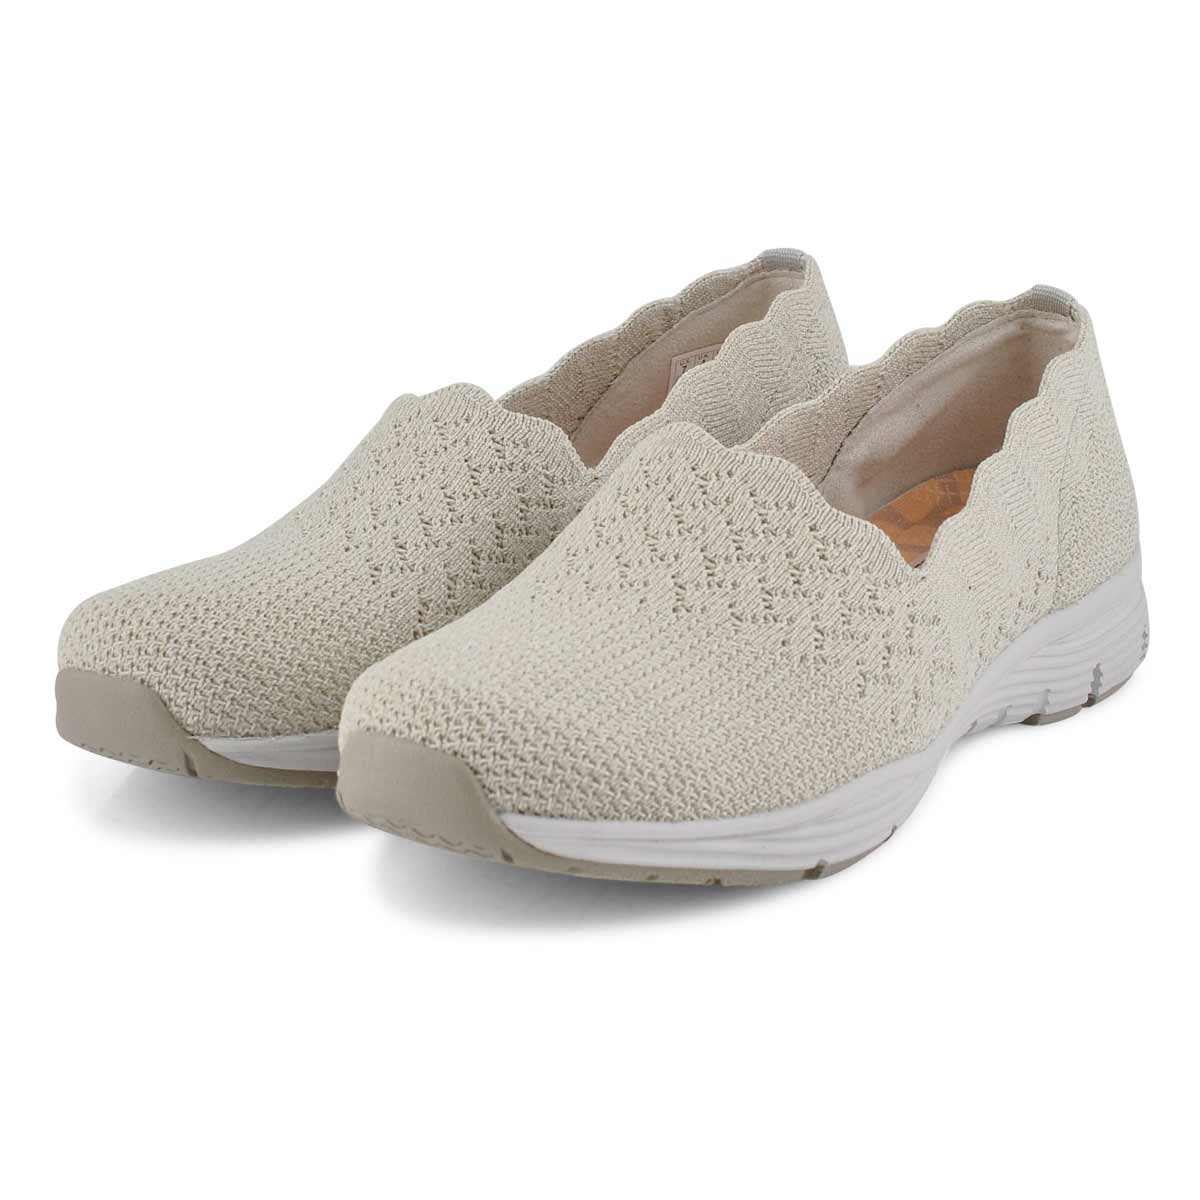 Skechers Women's Seager Stat Shoe - Natural | SoftMoc.com